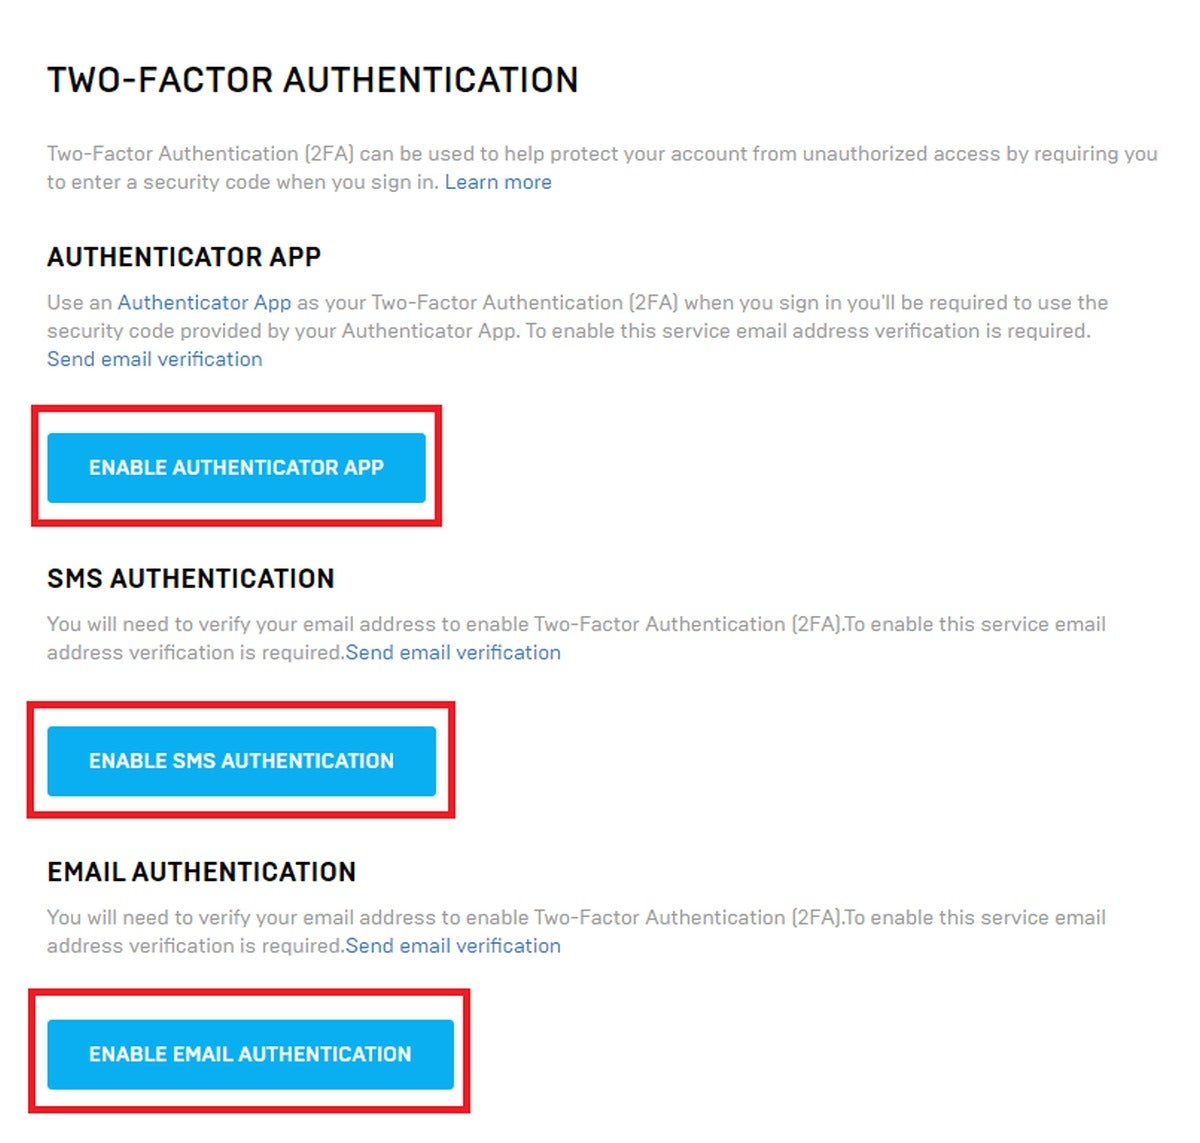 How to Enable Fortnite Two-Factor Authentication (Fortnite 2FA)